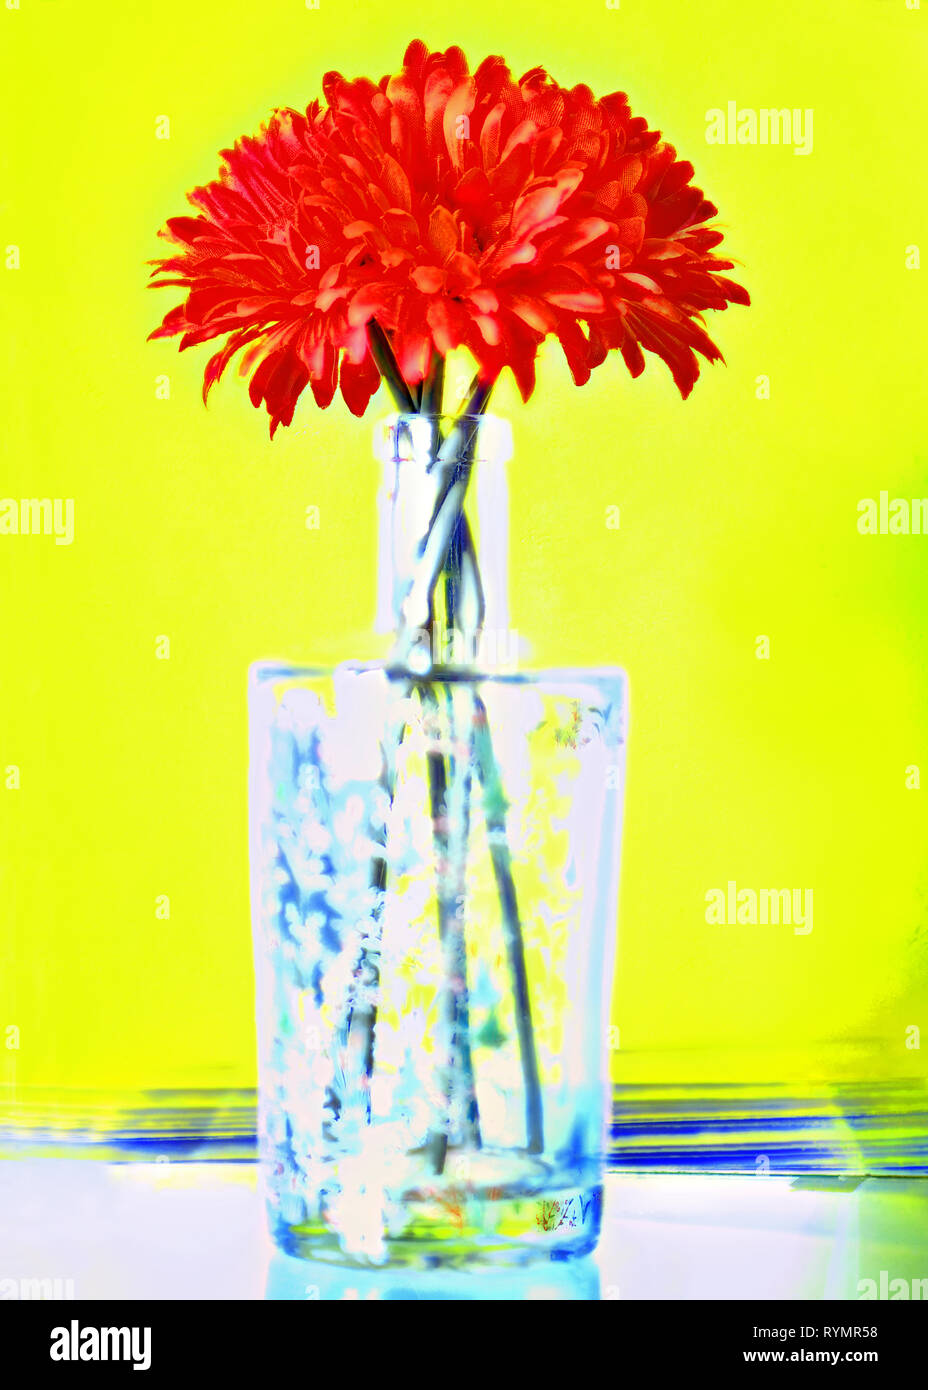 Single red flower in narrow necked bottle against yellow background Stock Photo